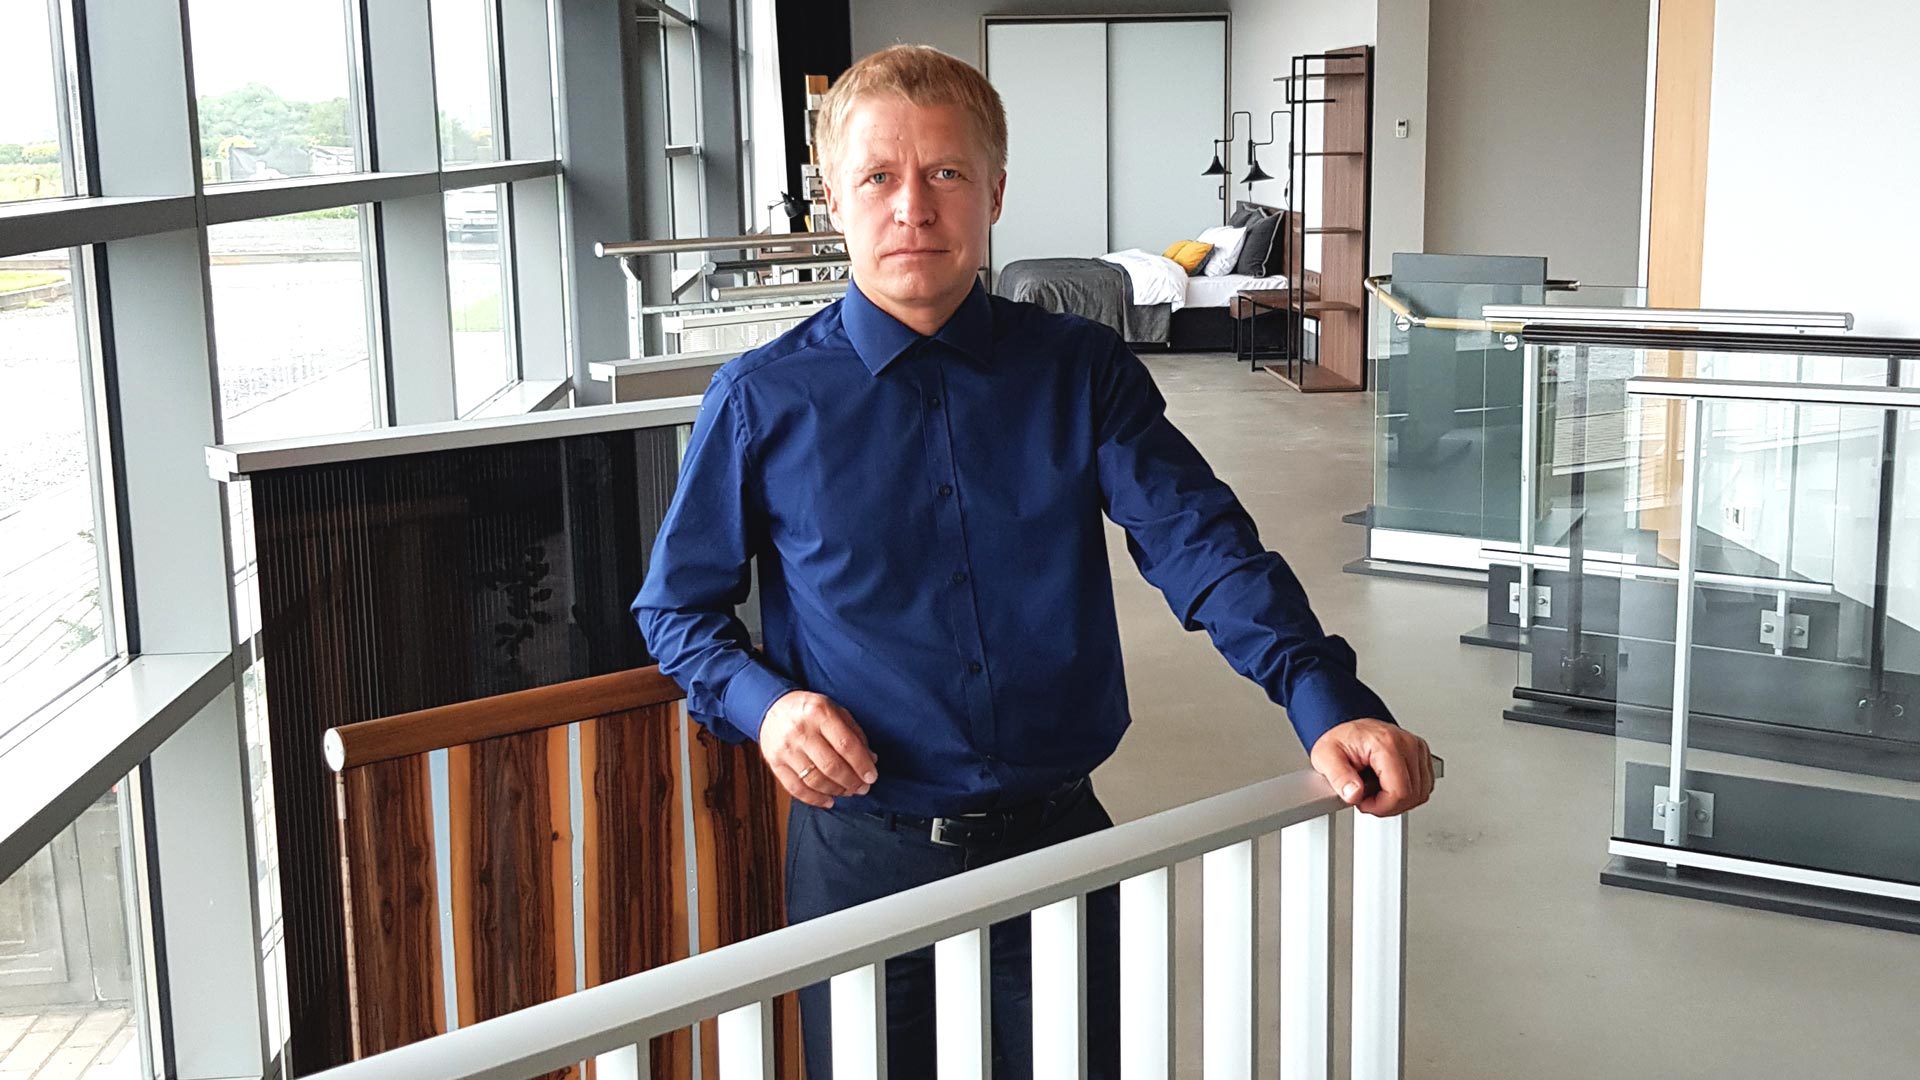 The story of experience by Ripo fabrika – from the very origins to this day and a view into future. Interview with the company’s chairperson of the management board, Elvis Sakārnis.